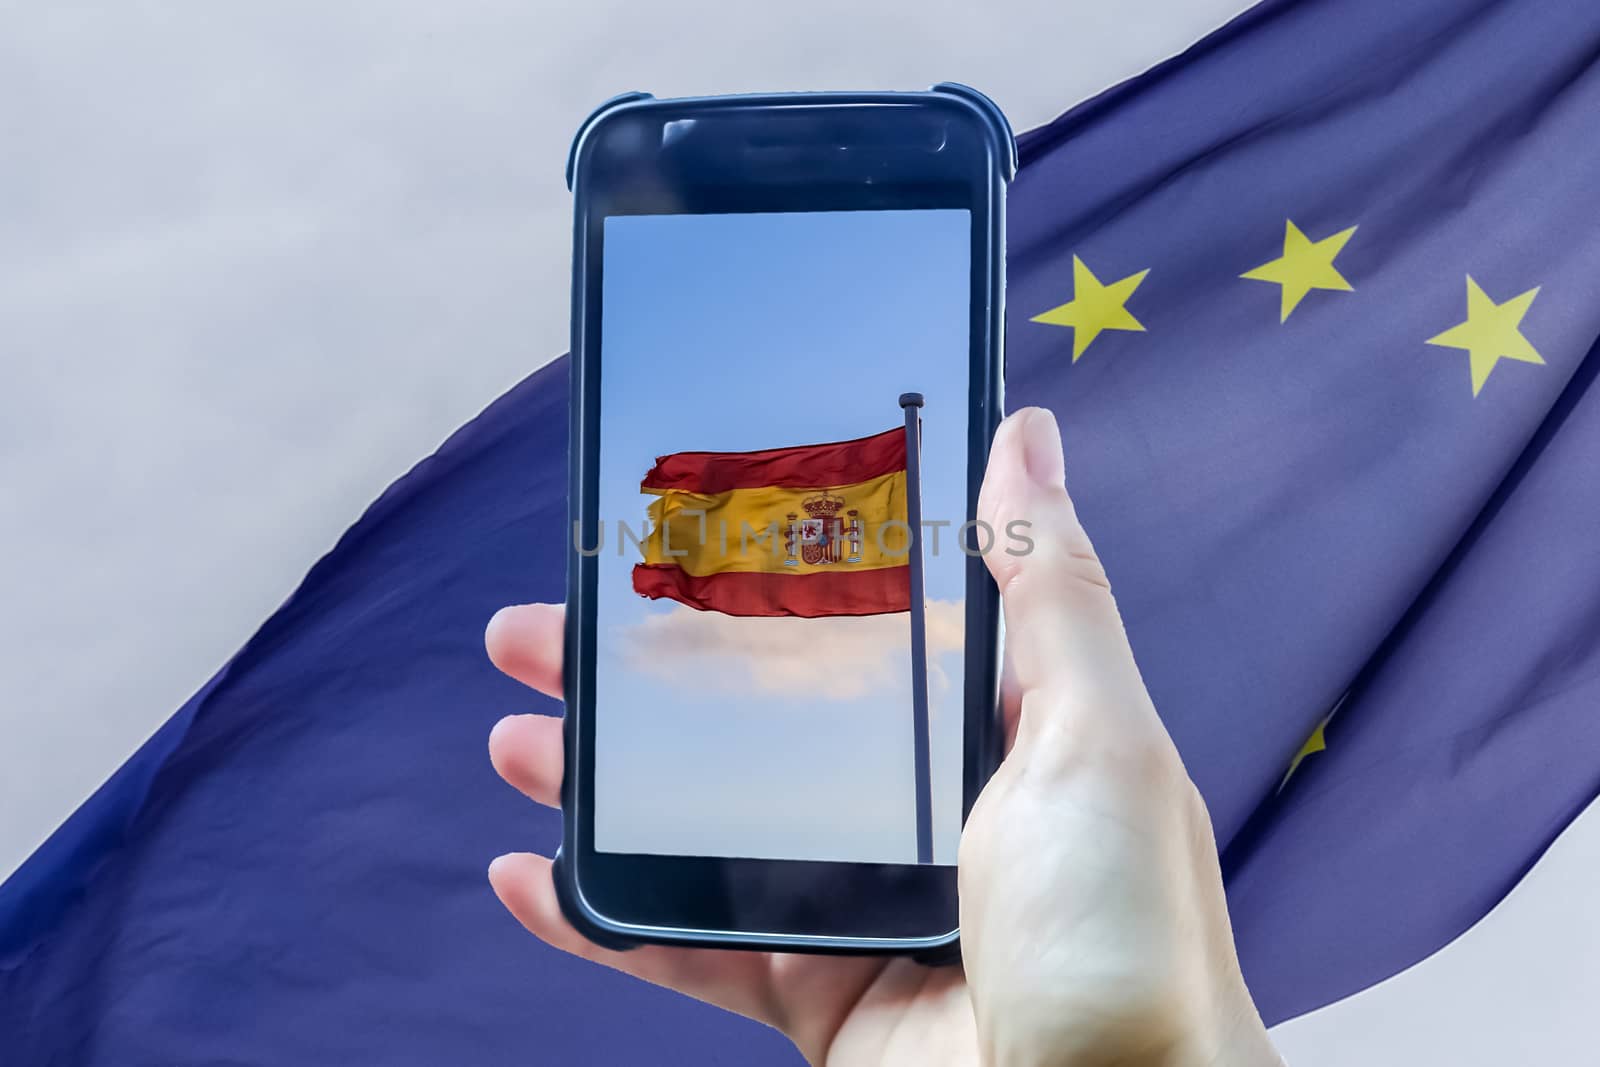 Spain flag in a smartphone display in front of a european union flag